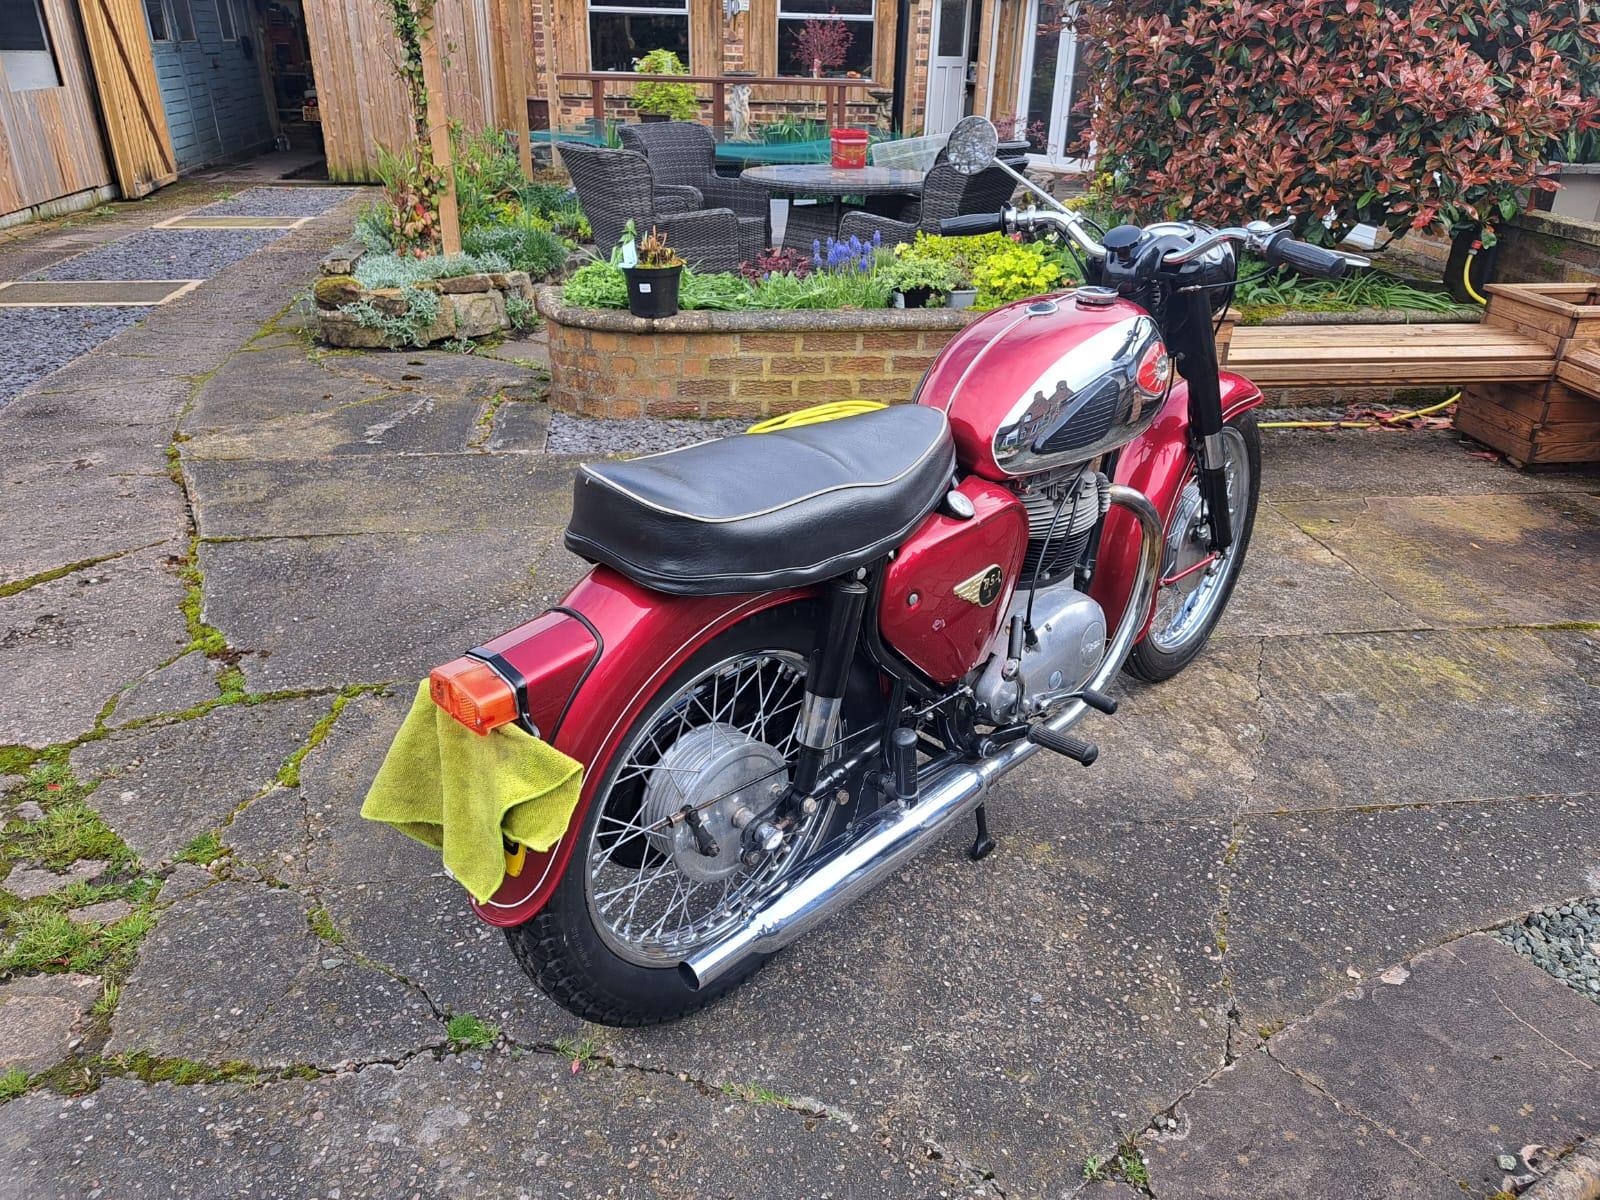 A 1964 BSA 500 TWIN MOTORCYCLE - ON A V5C, VENDOR STATES GOOD STARTER AND RUNNER, FROM A PRIVATE - Image 4 of 4